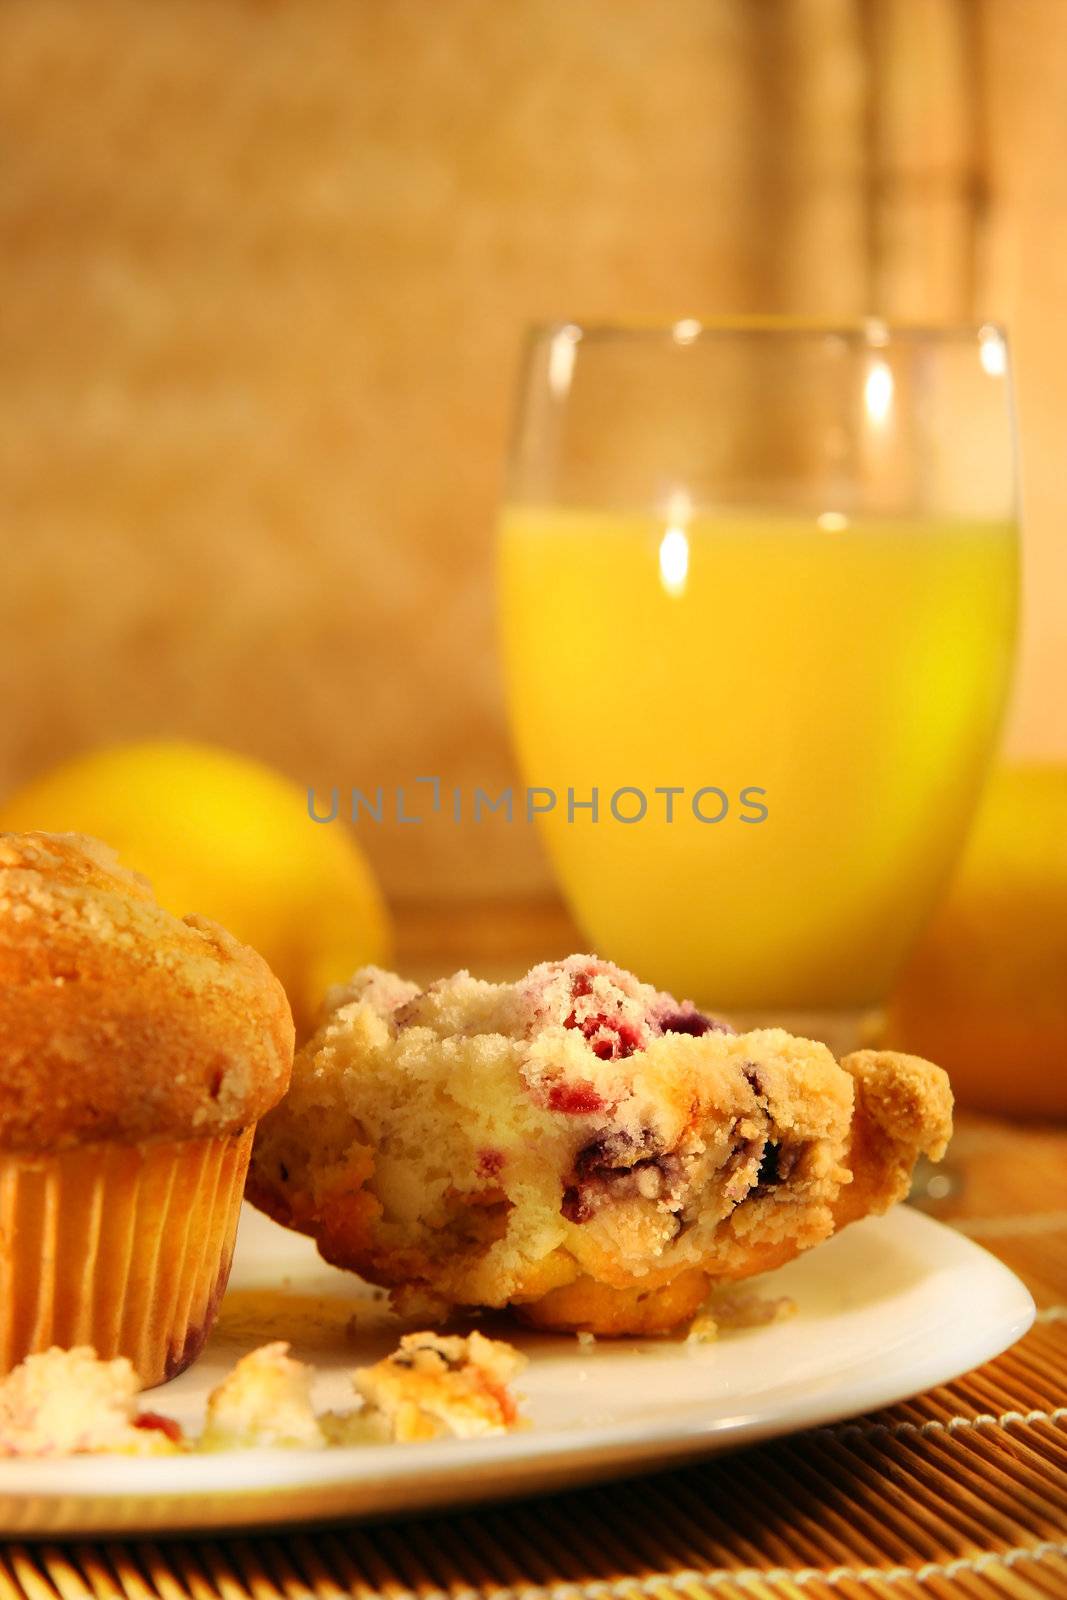 Muffins and orange juice by Sandralise